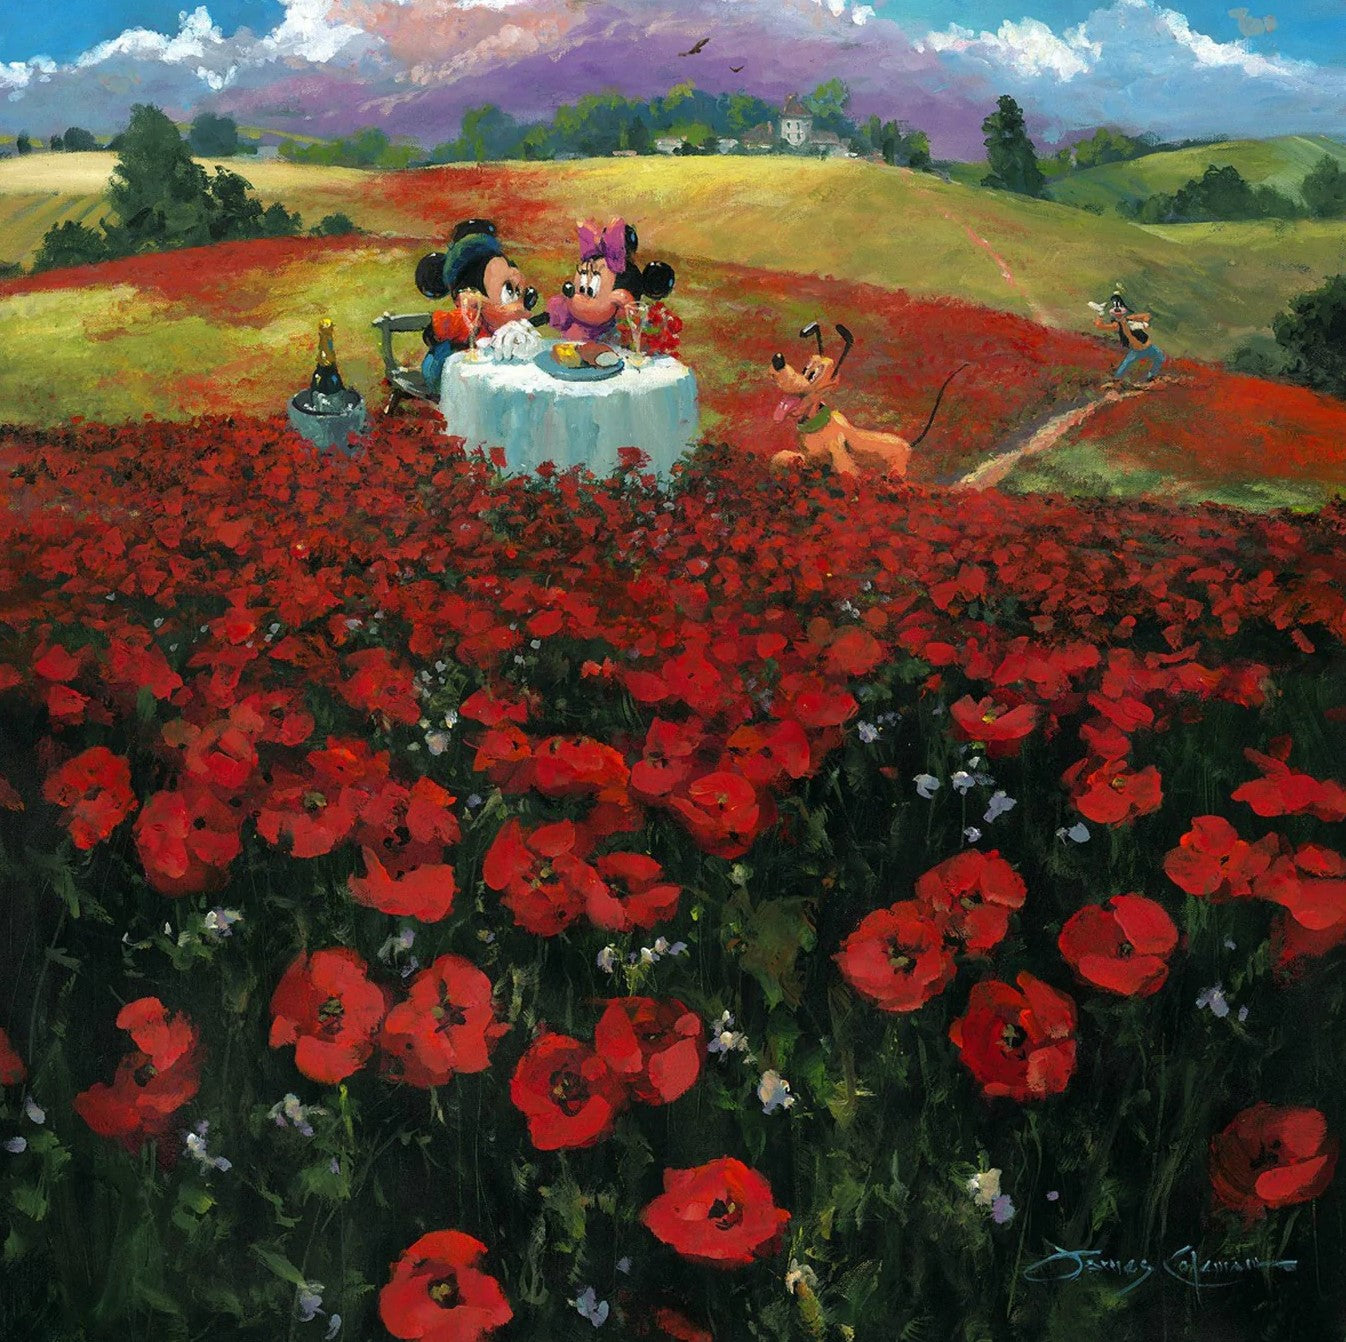 Red Poppies (Premiere) by James Coleman with Mickey and Minnie